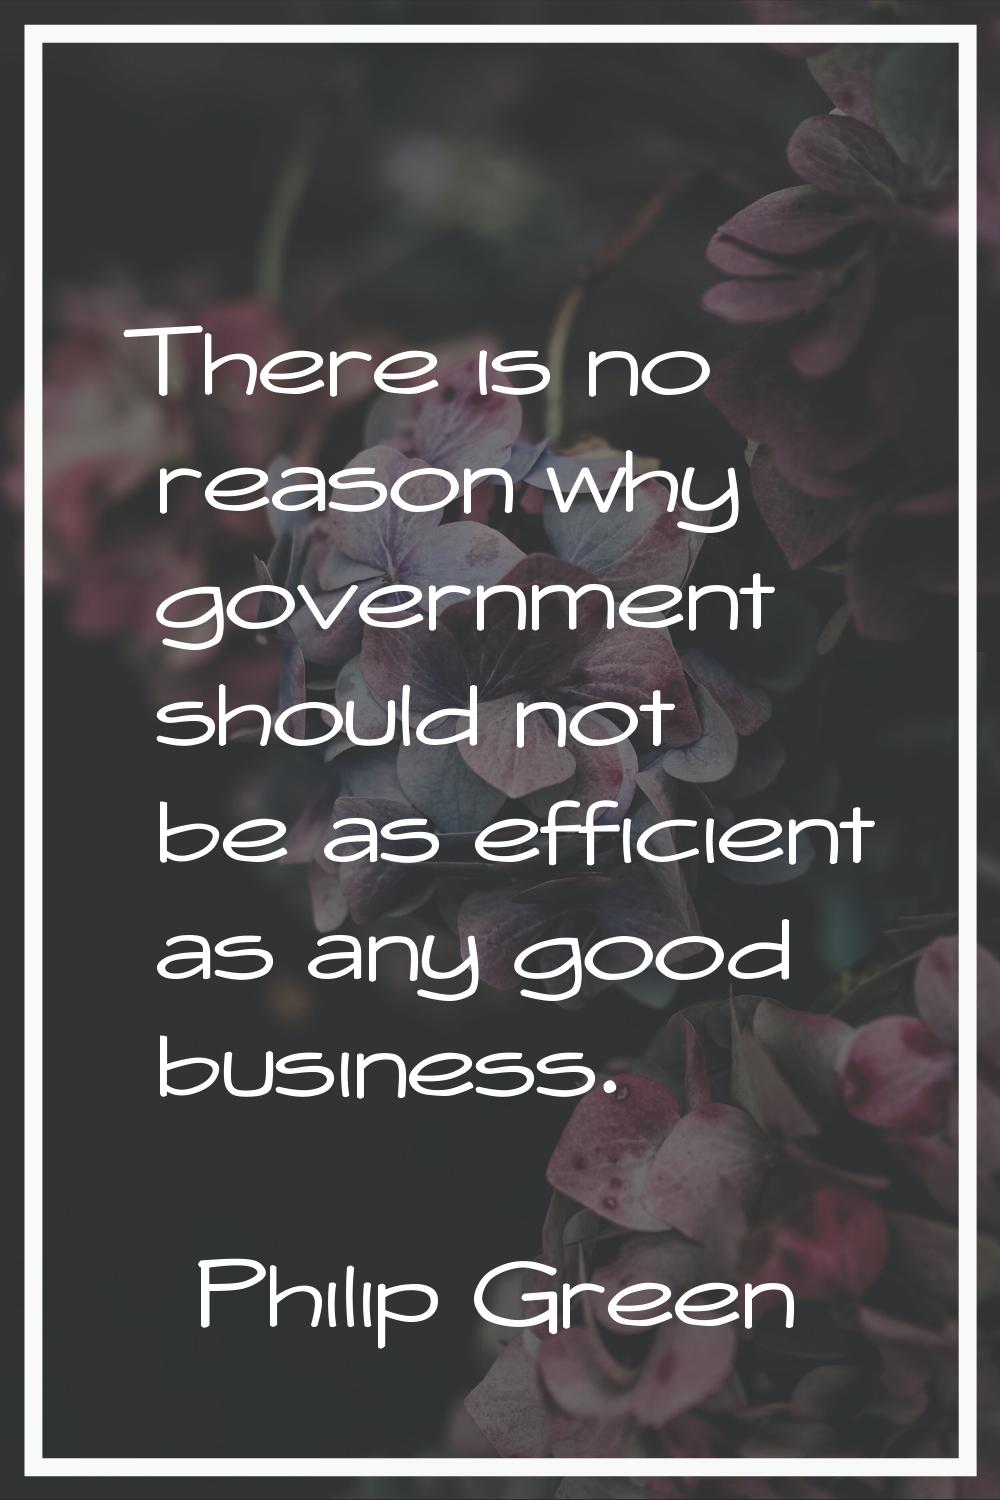 There is no reason why government should not be as efficient as any good business.